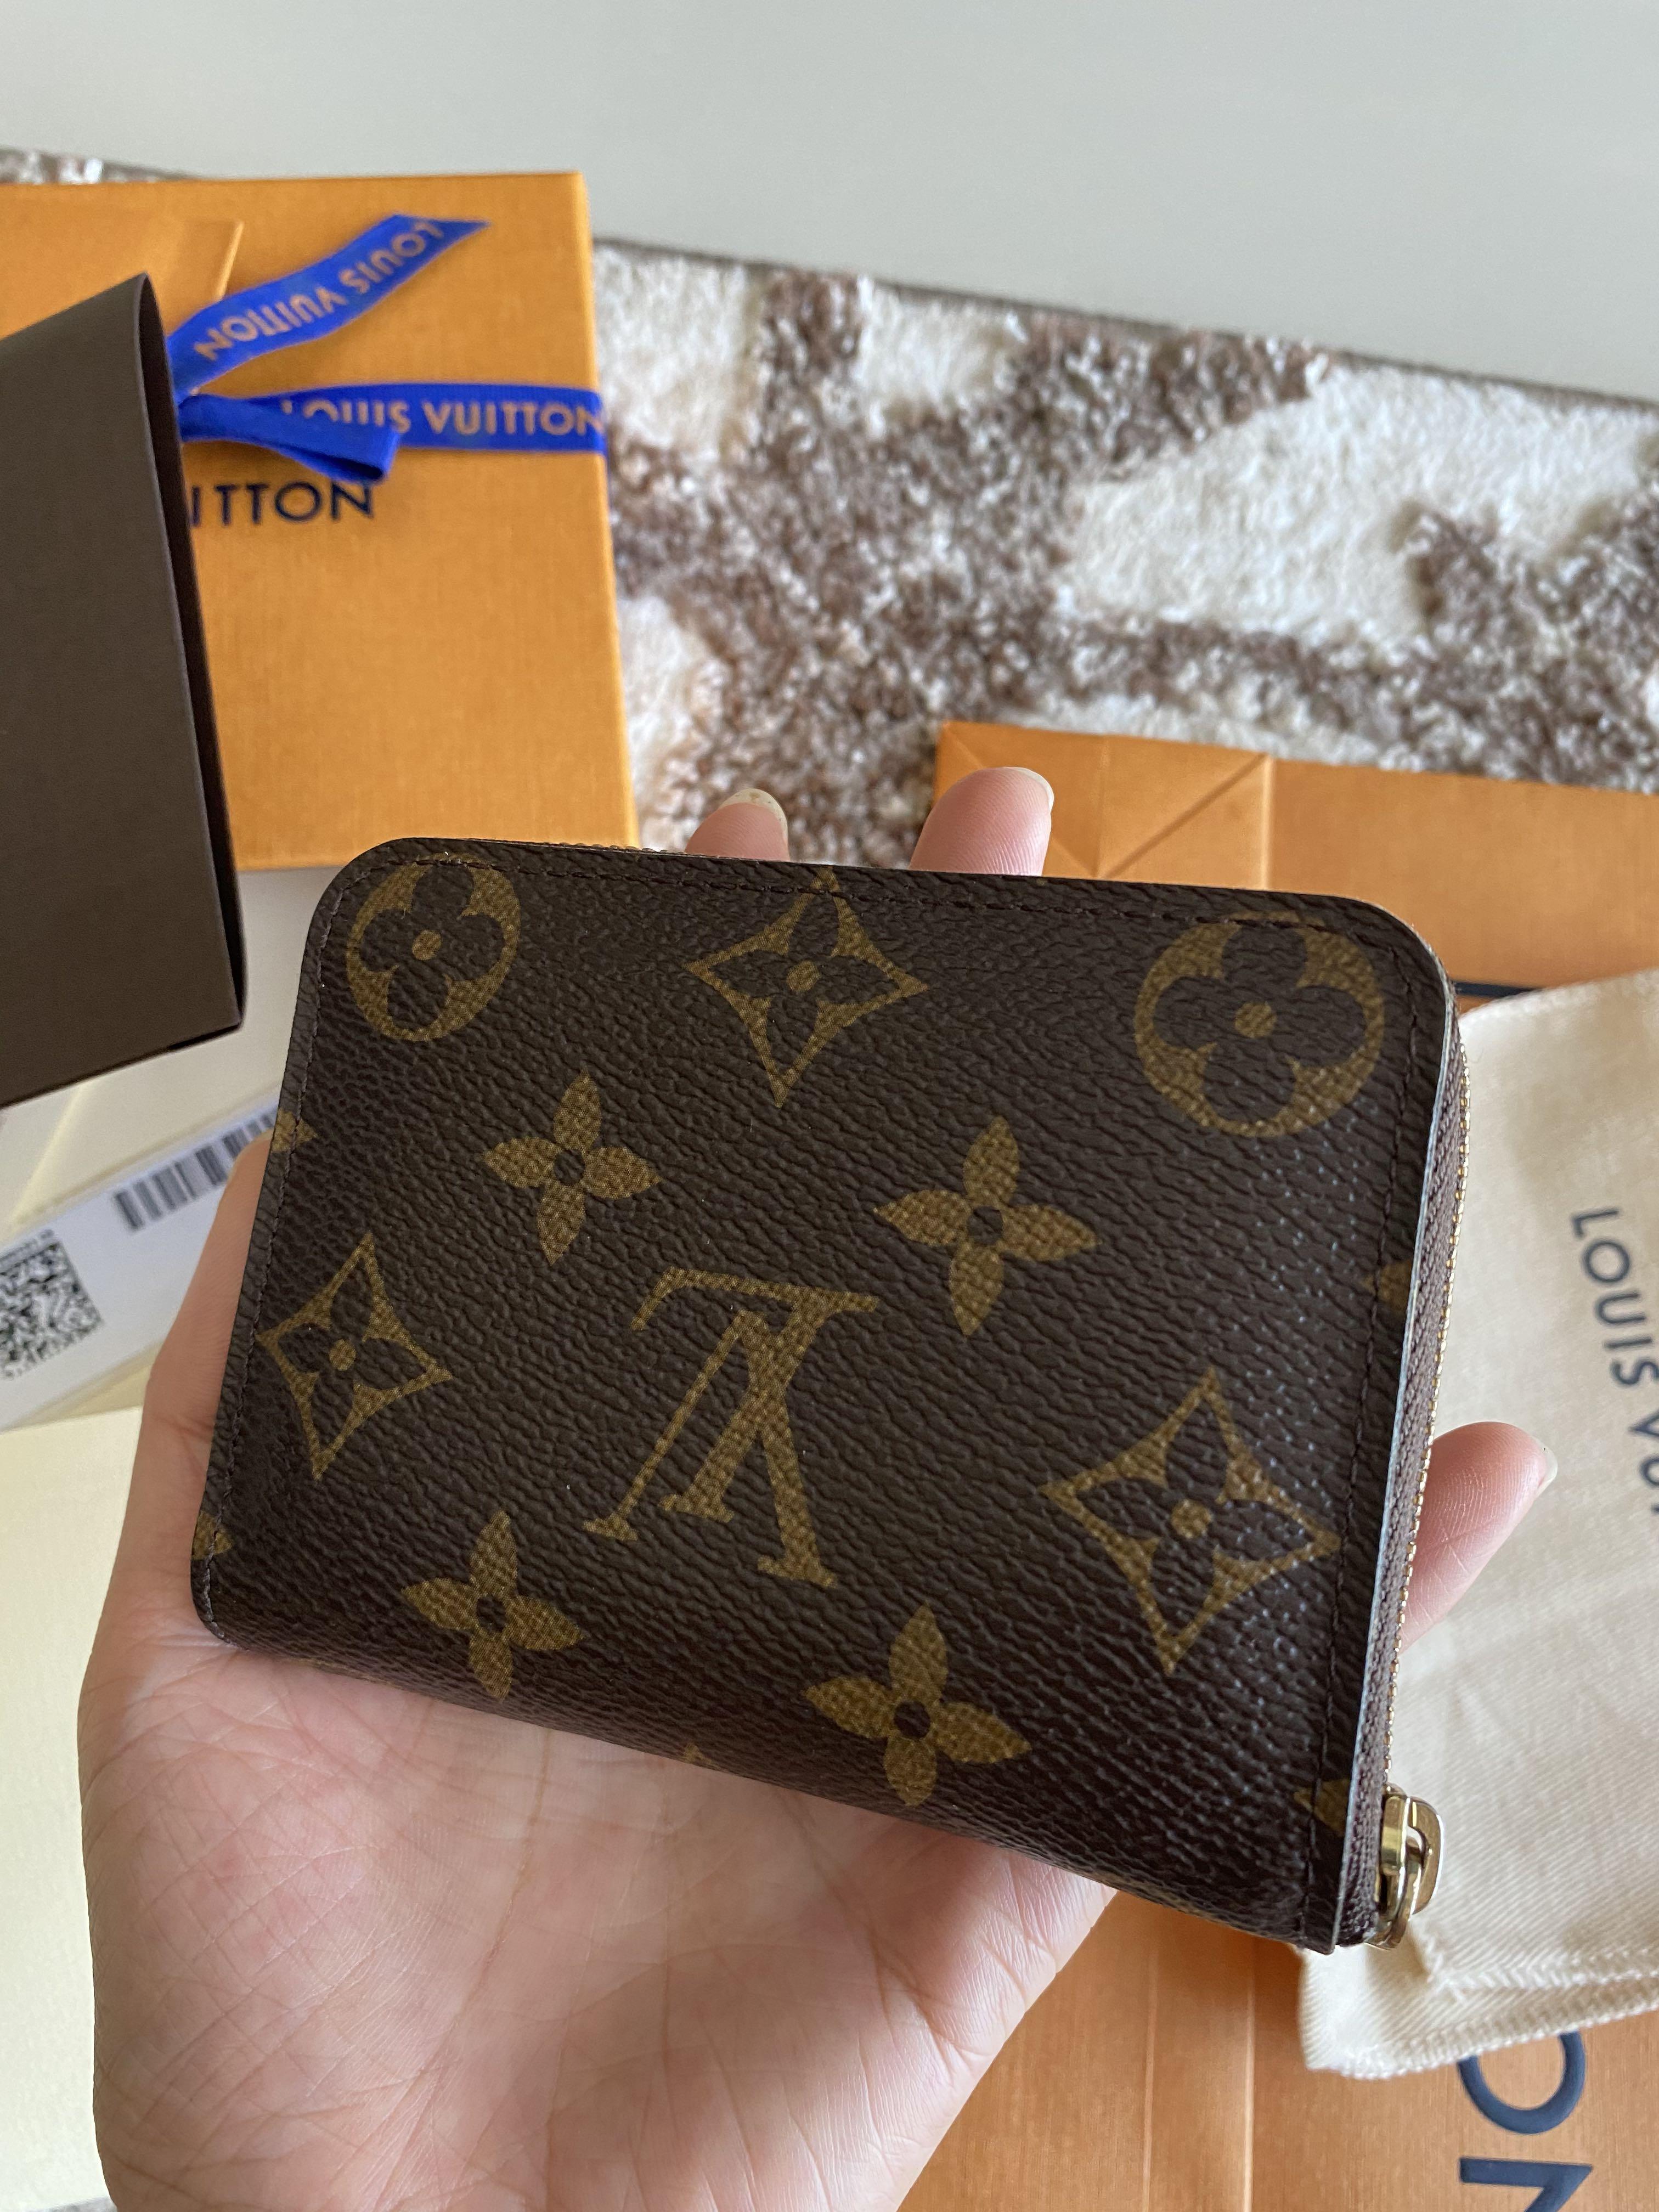 Louis Vuitton Pre-Owned Pre-Owned Accessories for Women - Shop on FARFETCH